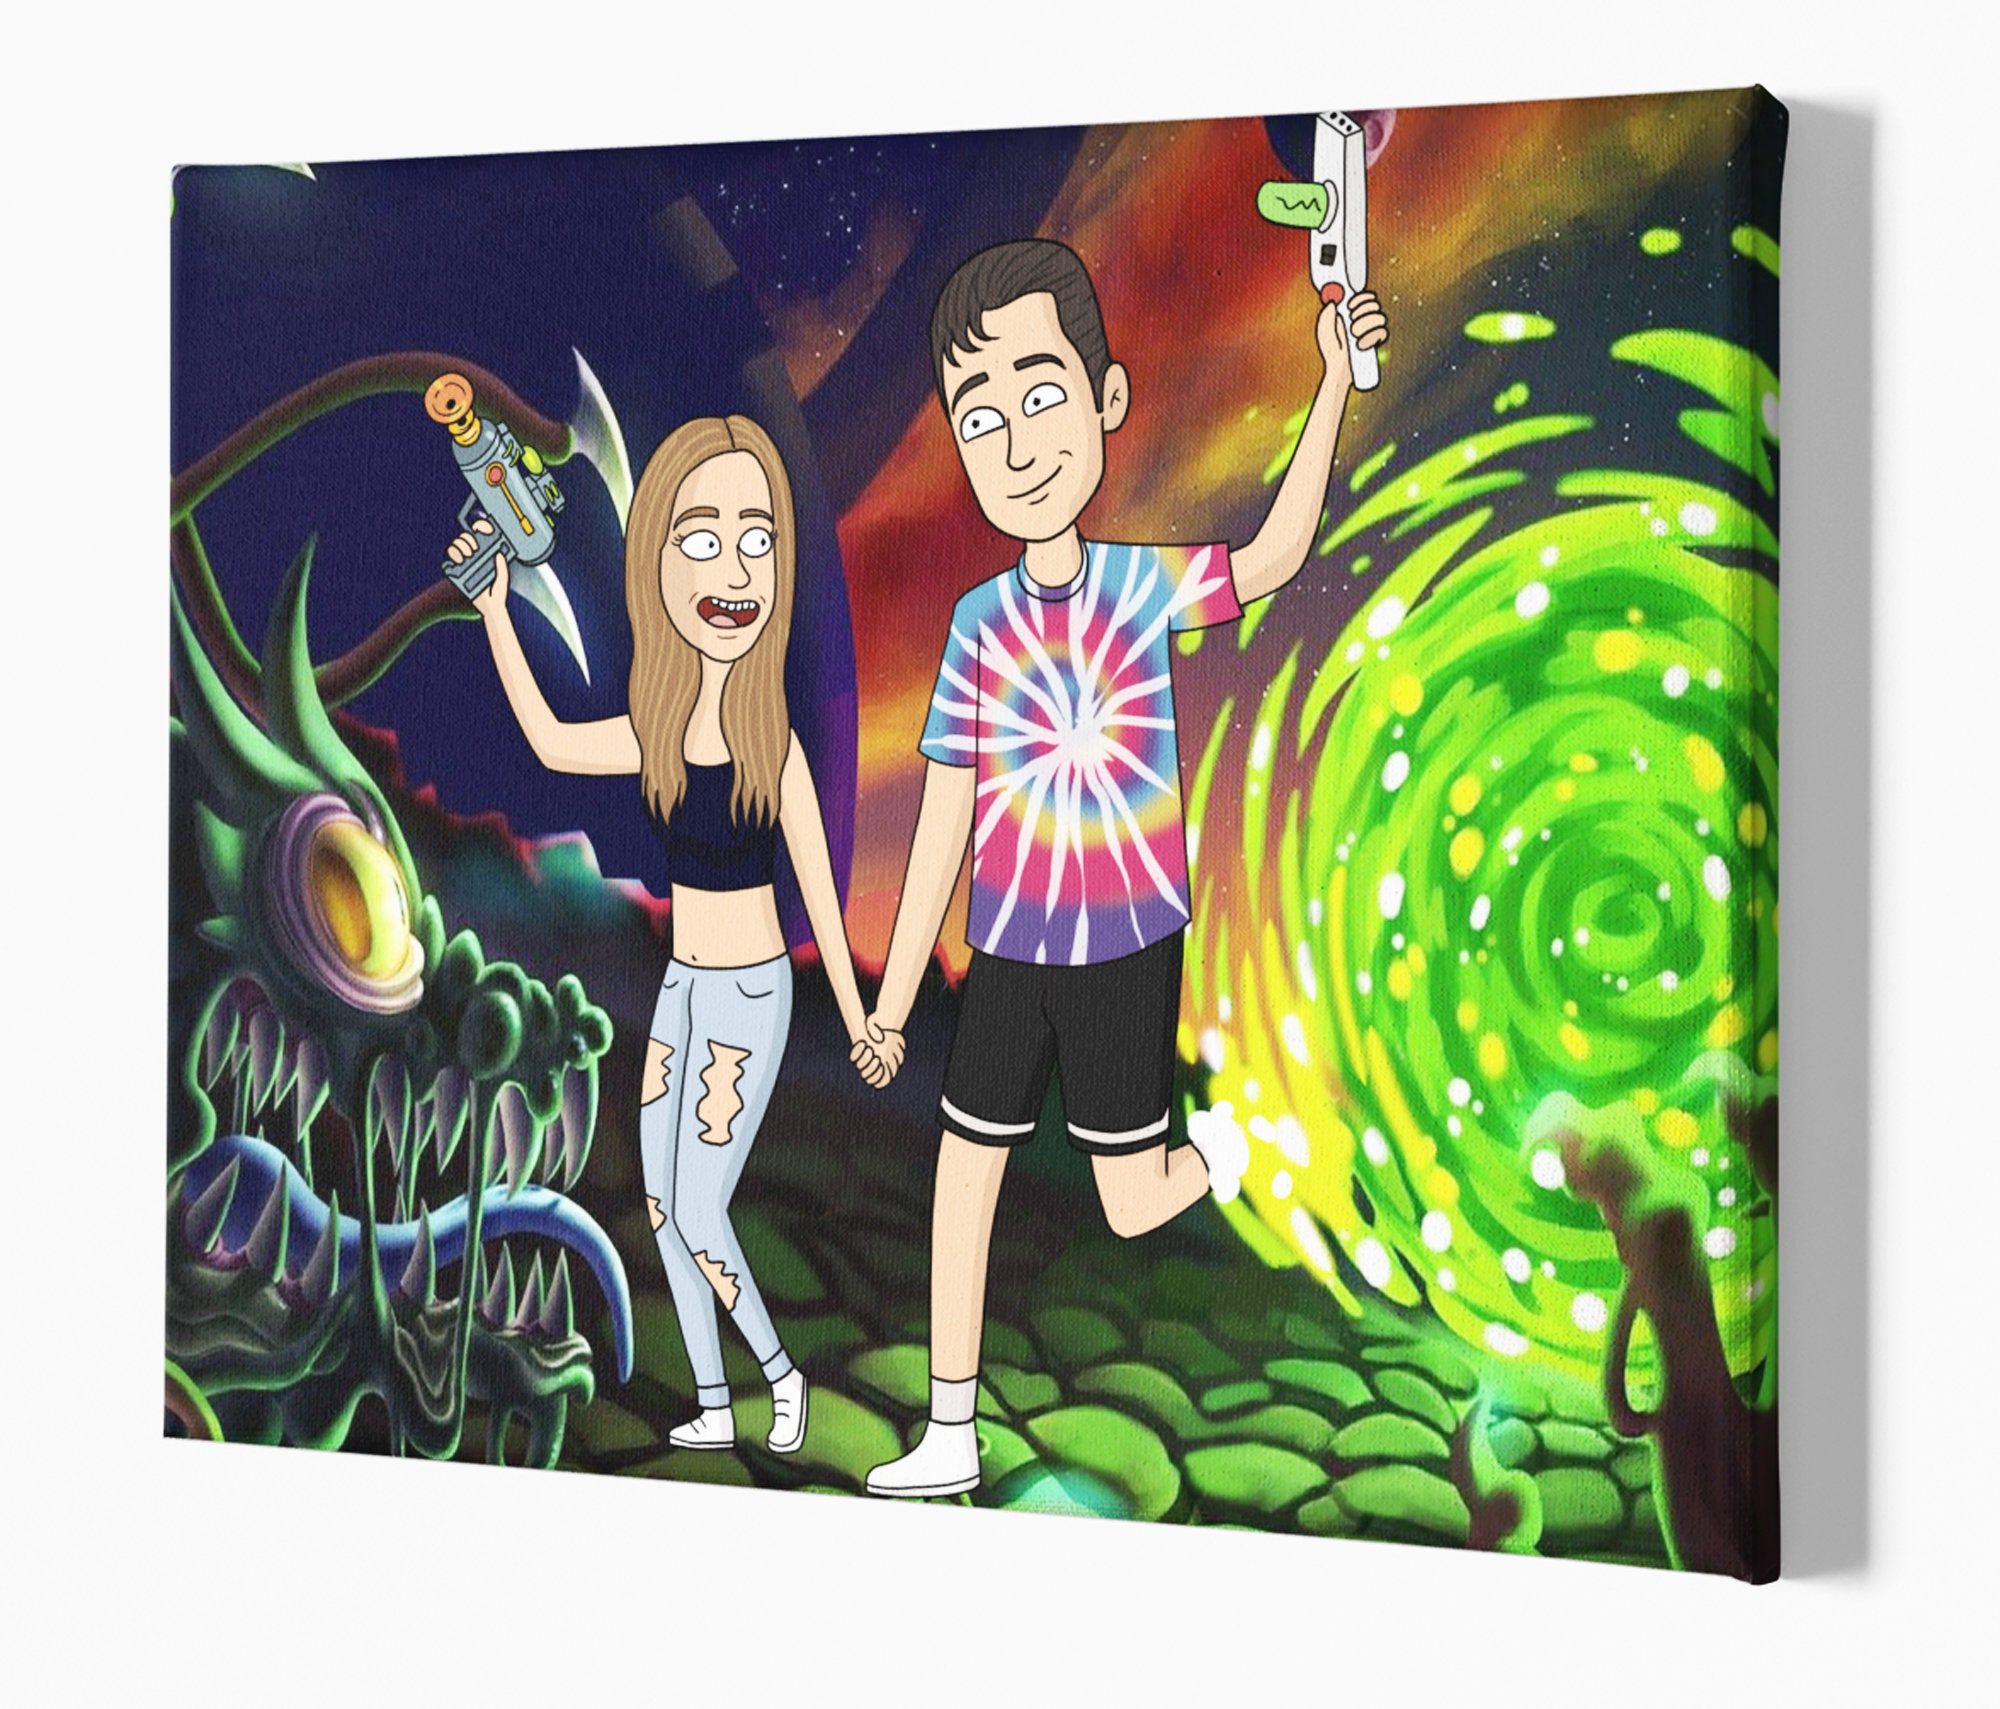 Rick And Morty Canvas Prints & Wall Art for Sale (Page #7 of 10